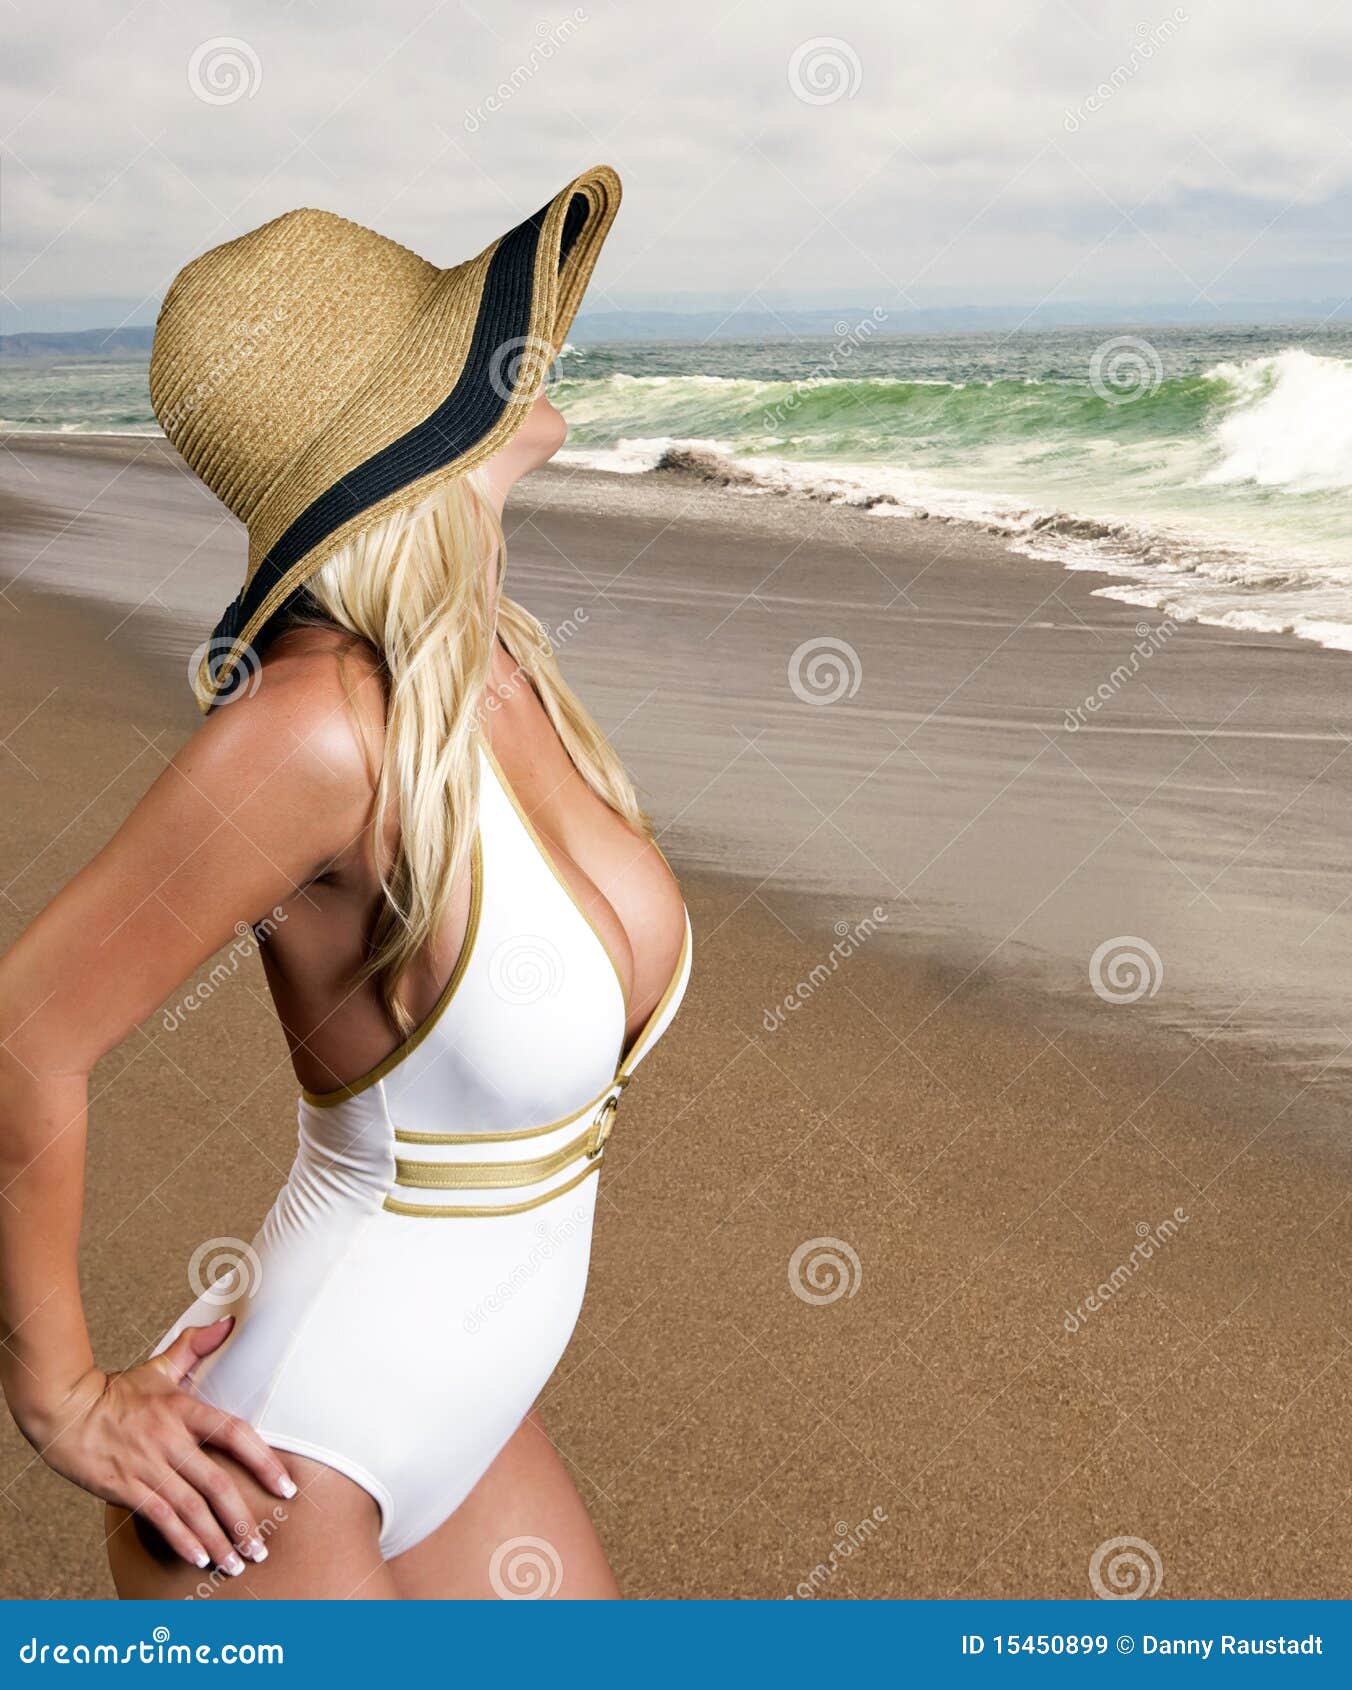 Beautiful Blonde On The Beach Royalty Free Stock Images